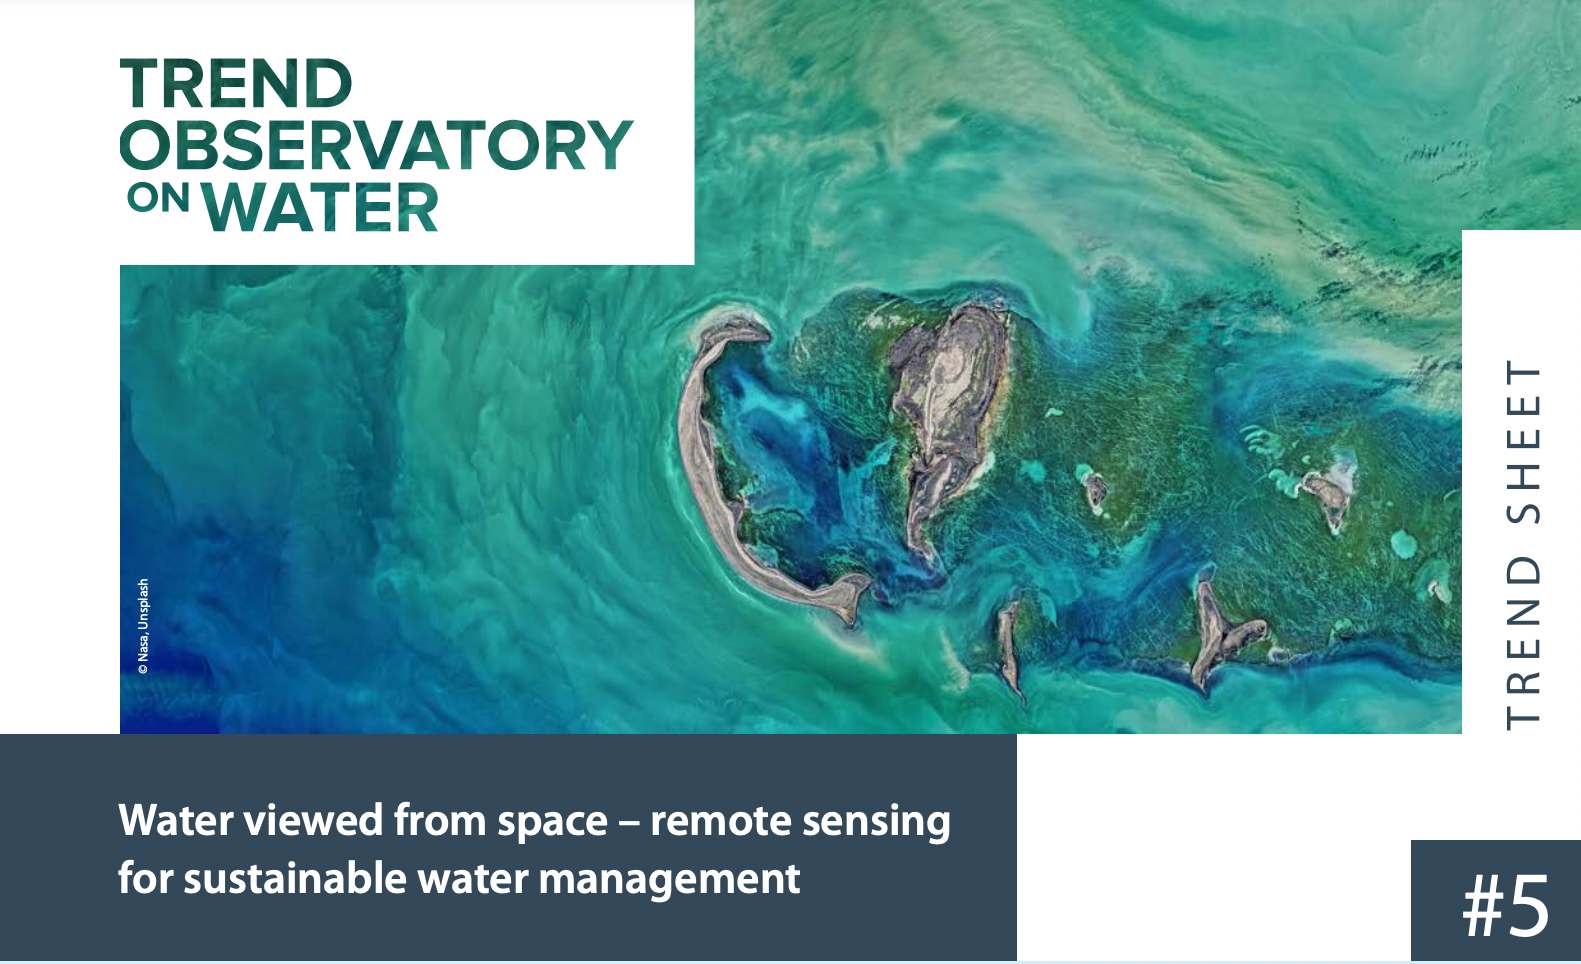 Remote Sensing for Sustainable Water Management